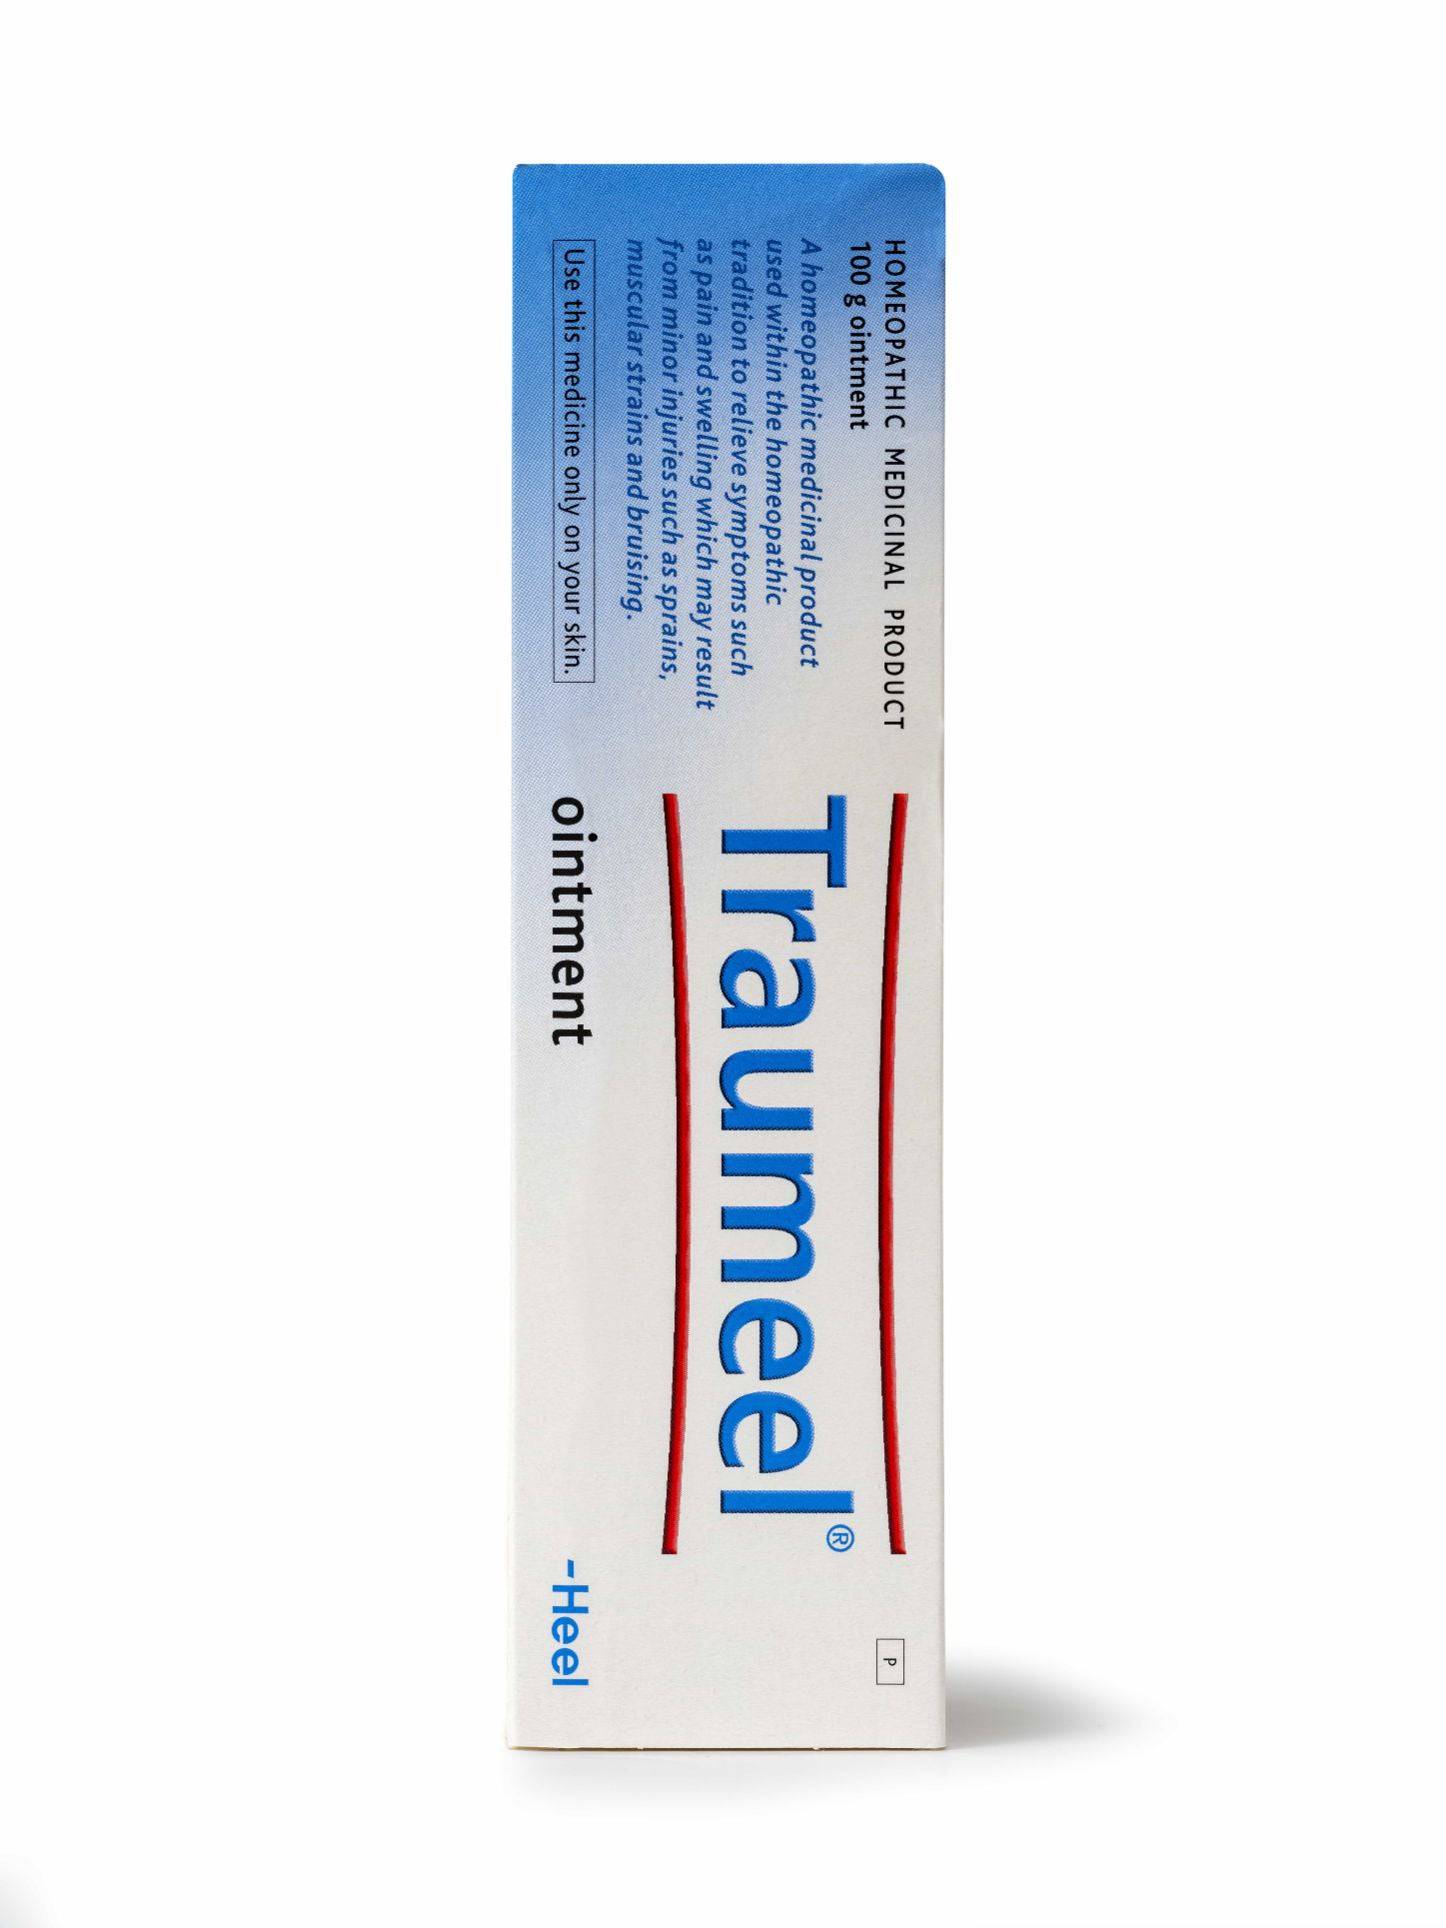 Traumeel Ointment 100g